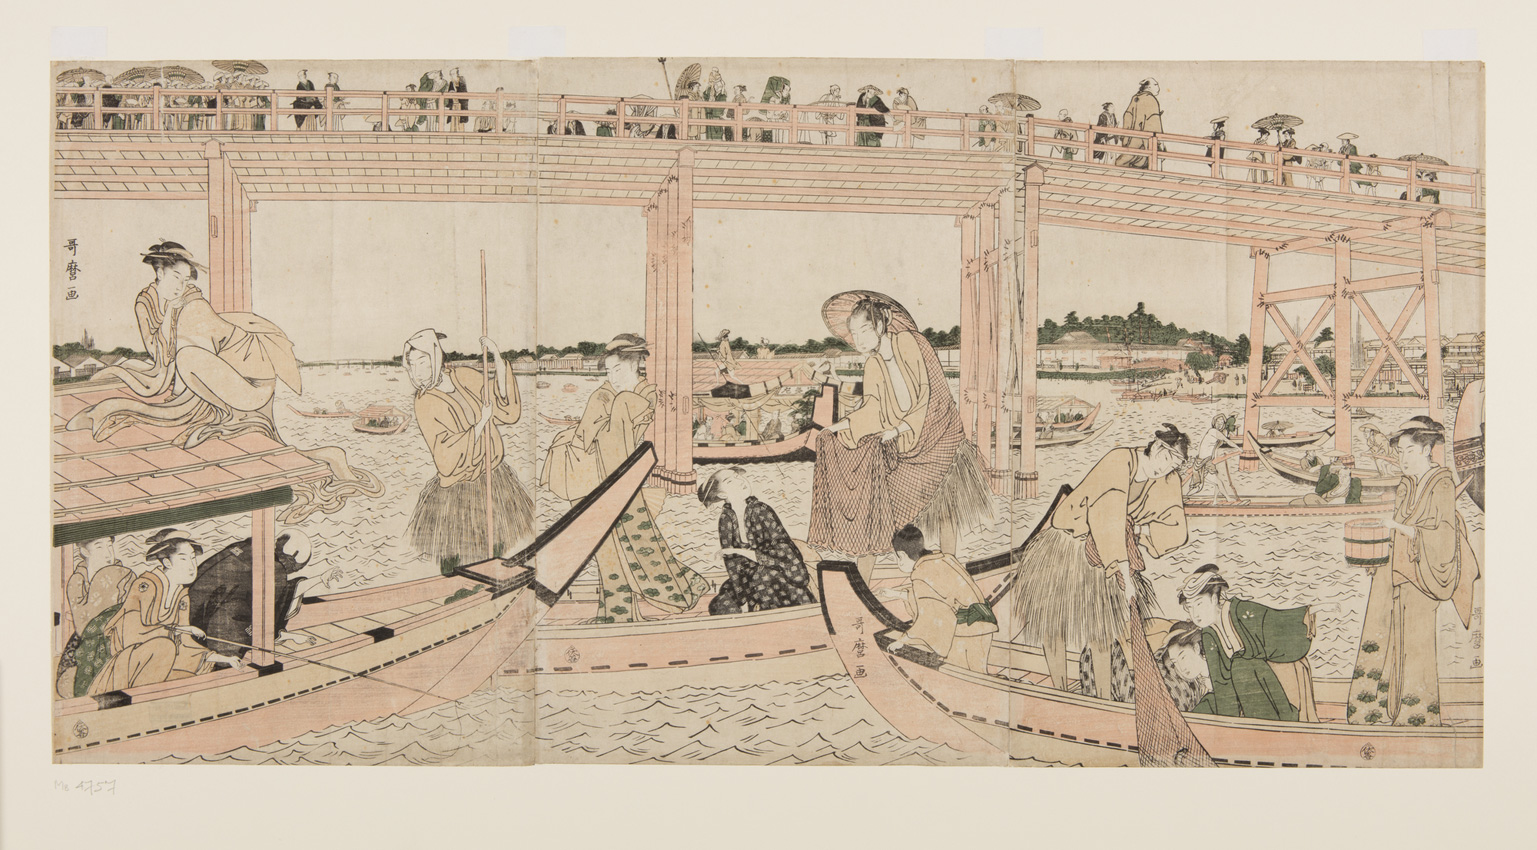 Japanese print of a busy river scene. Boats with passengers in traditional dress sail on the river, a woman climbs onto the canopy. A bridge spans the river and people walk over it.